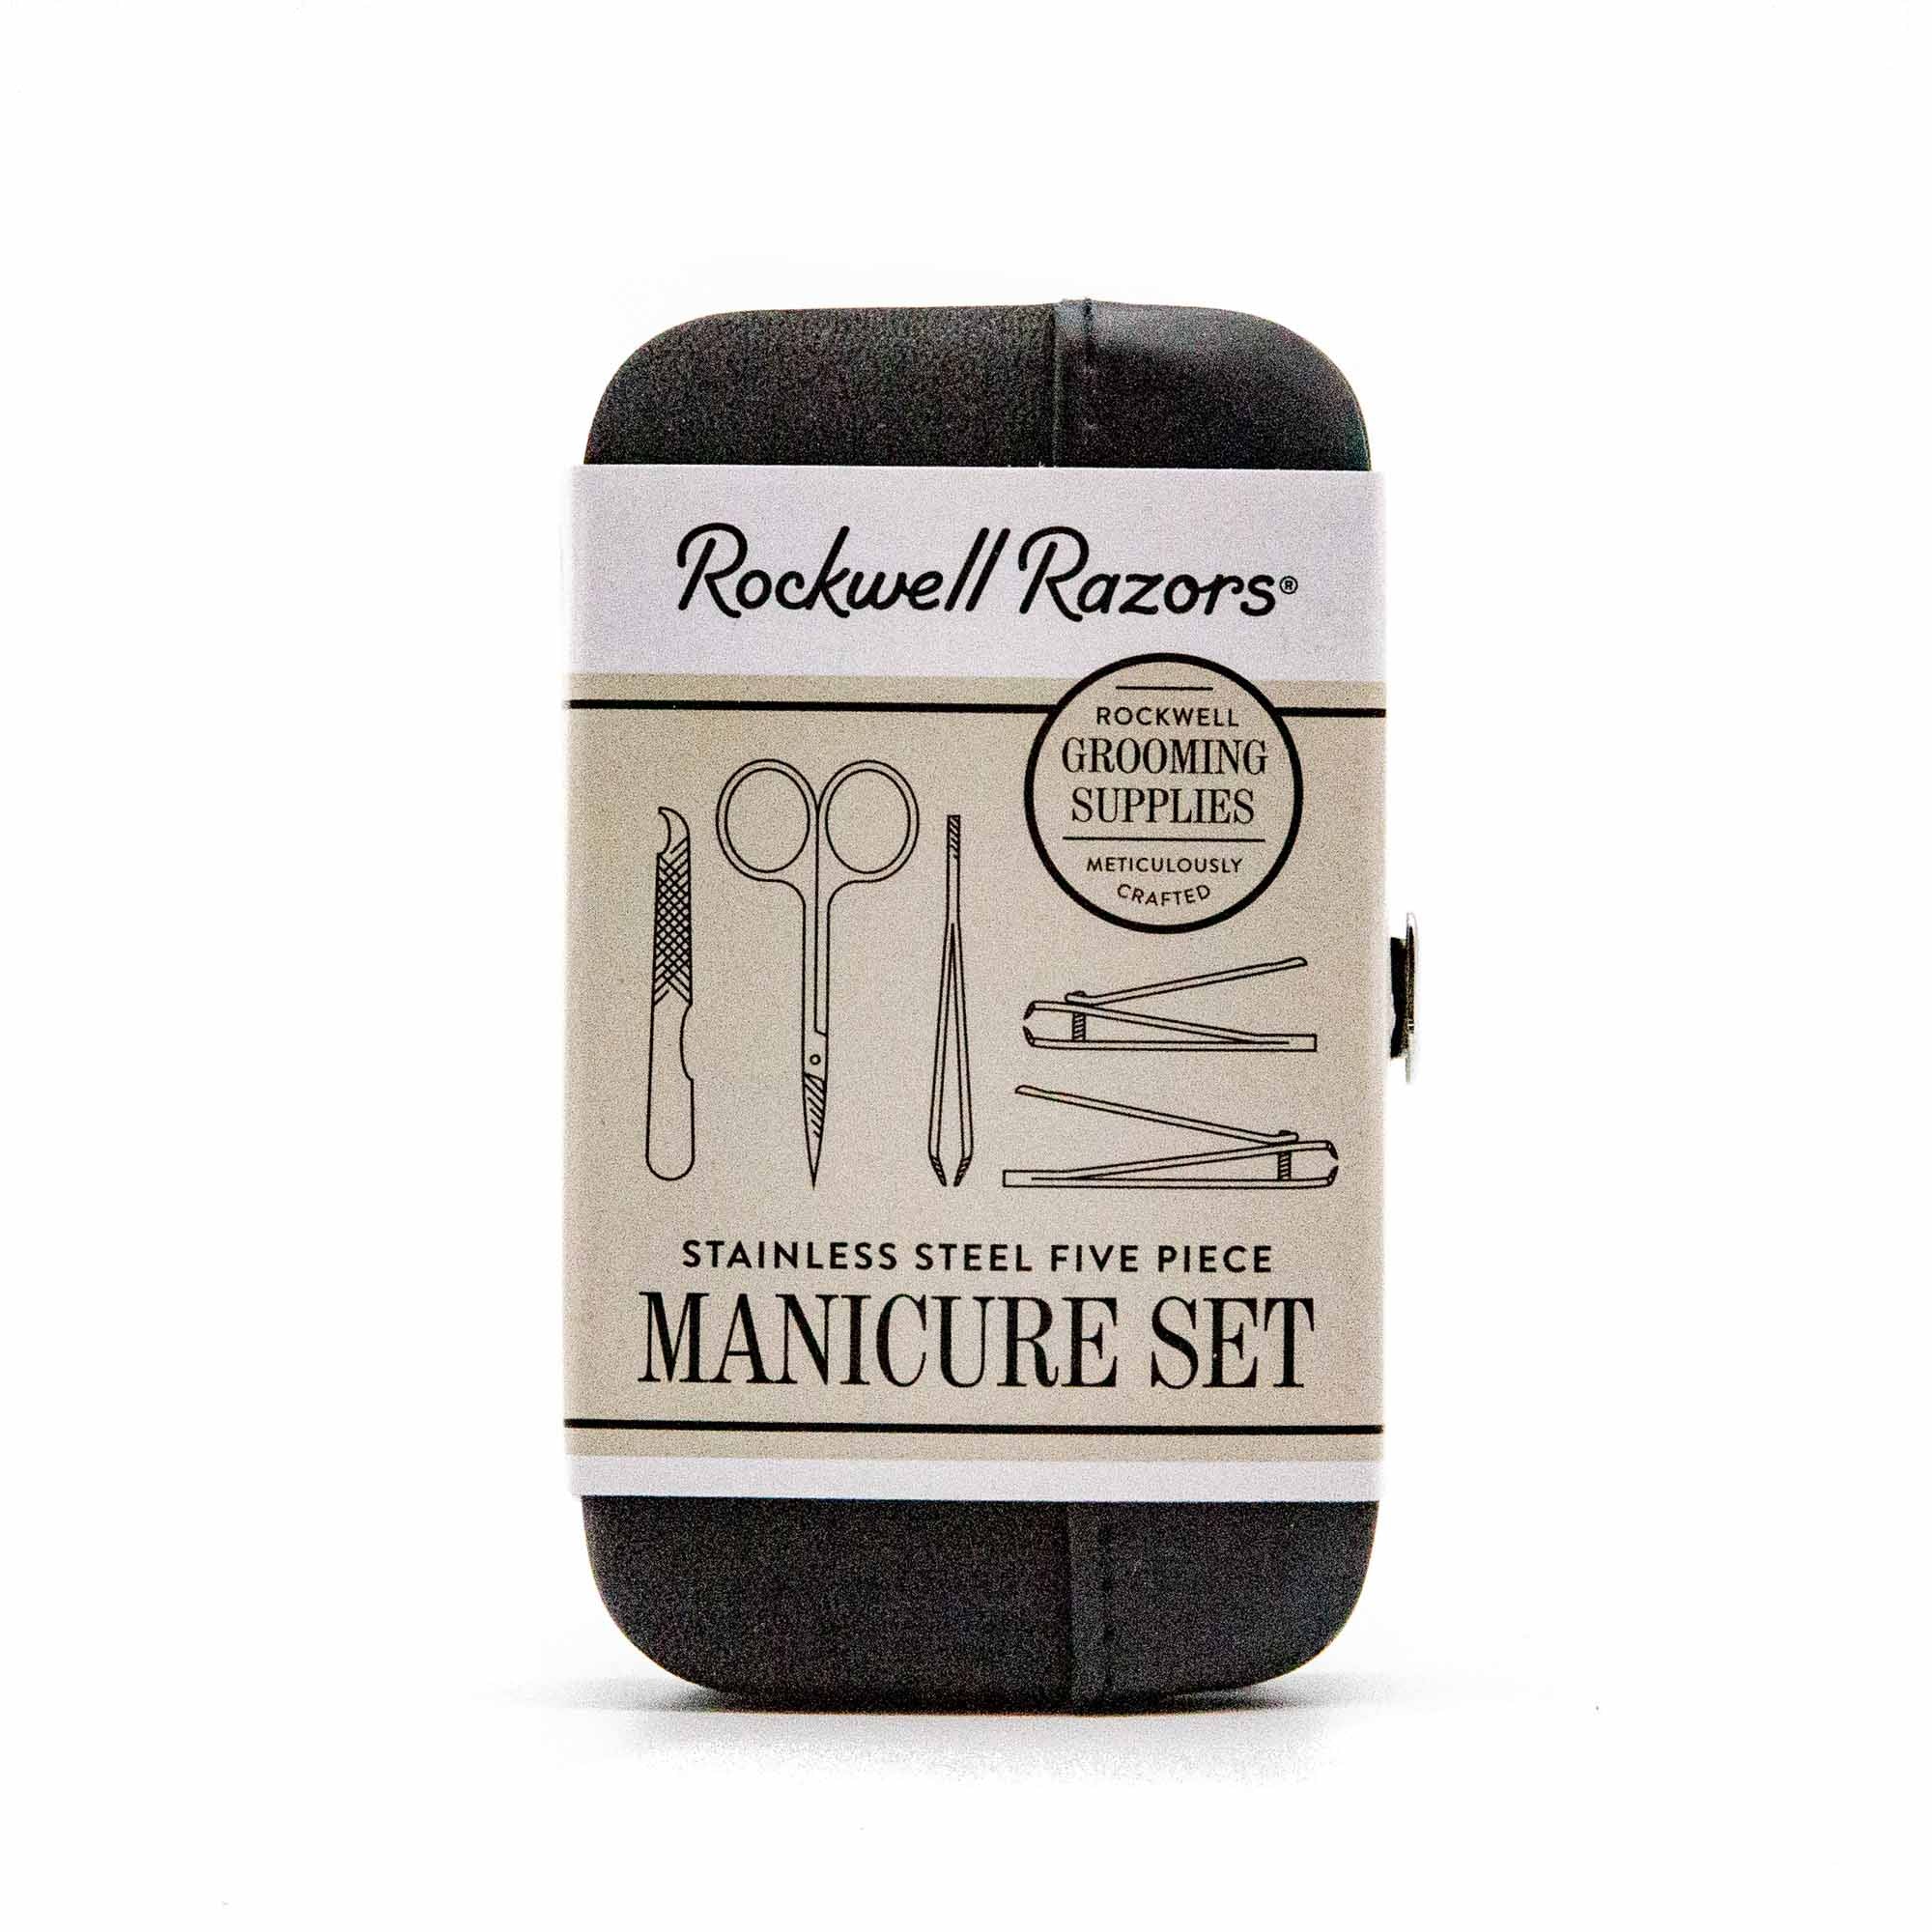 Rockwell Razors Stainless Steel Five Piece Manicure Set - Mortise And Tenon